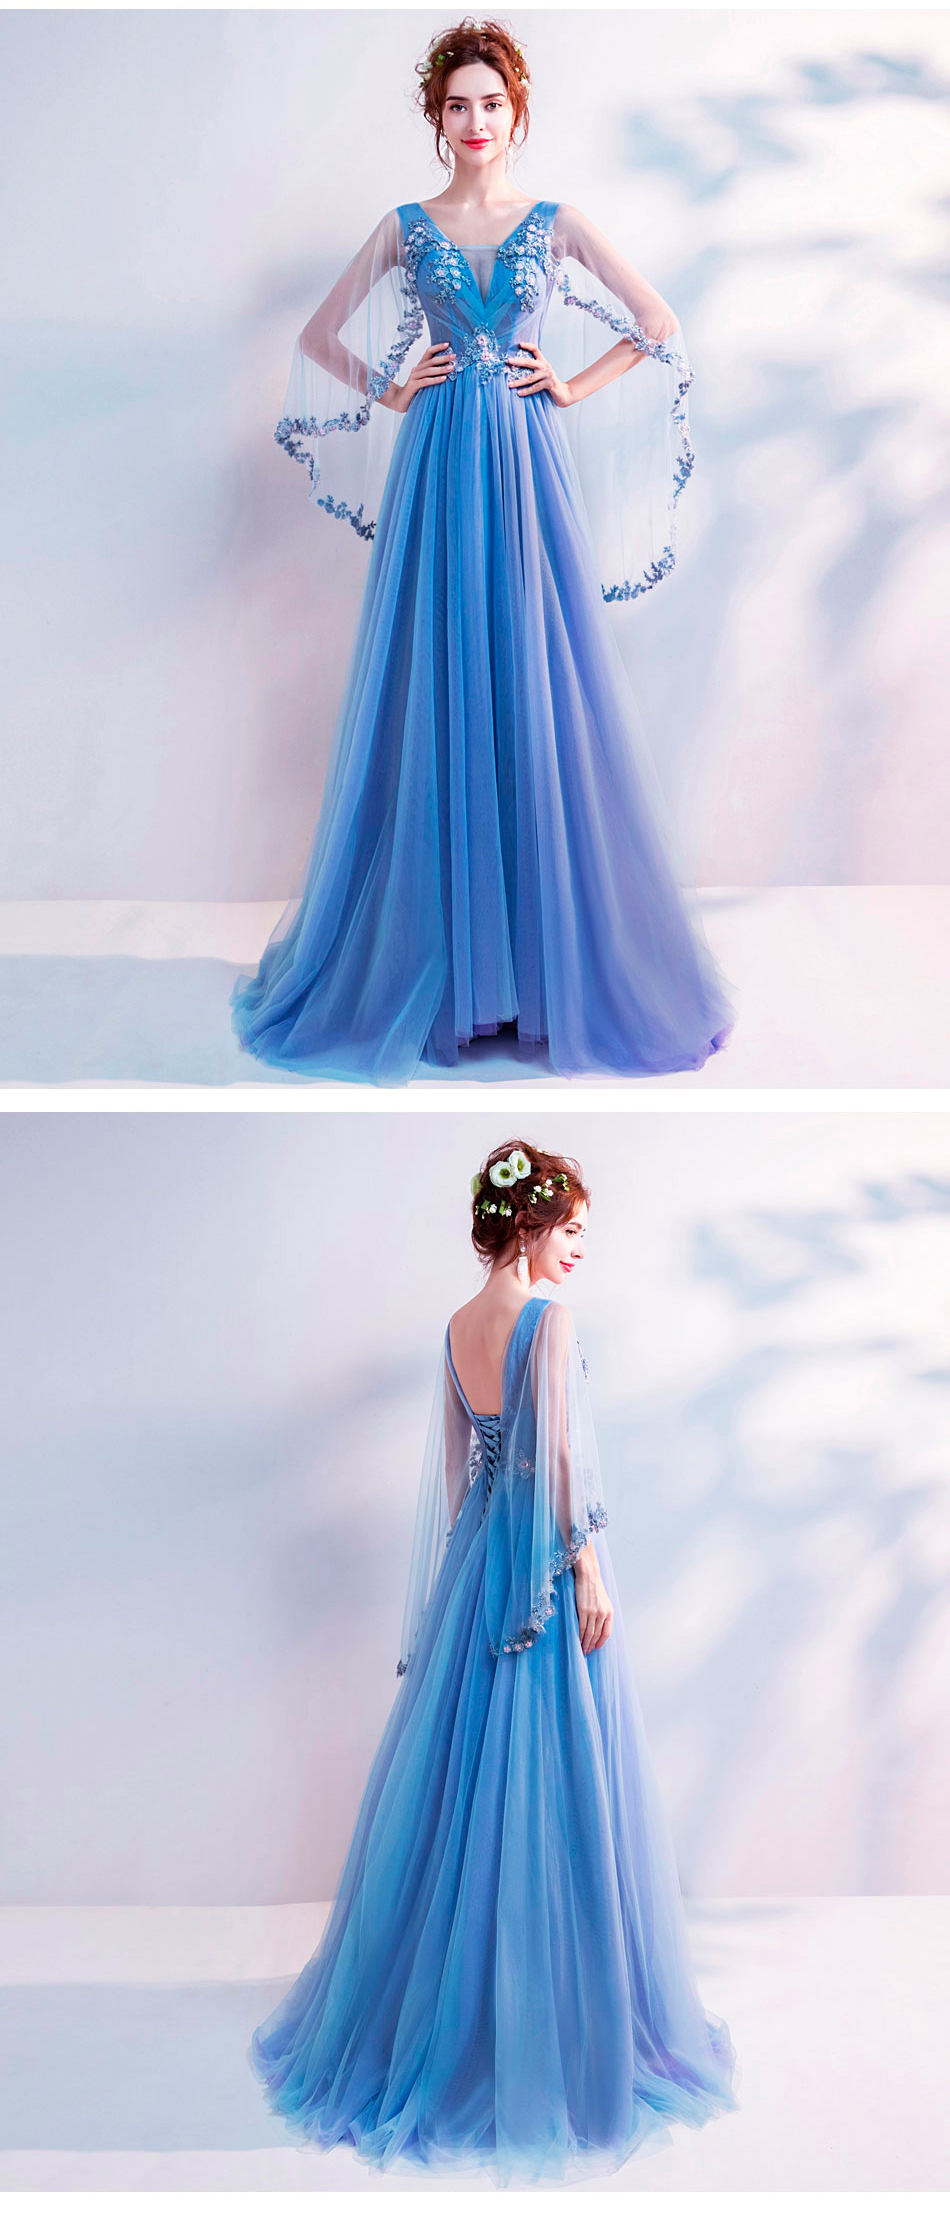 Beautiful Long Sleeve Blue Tulle Long Floral Prom Dress14